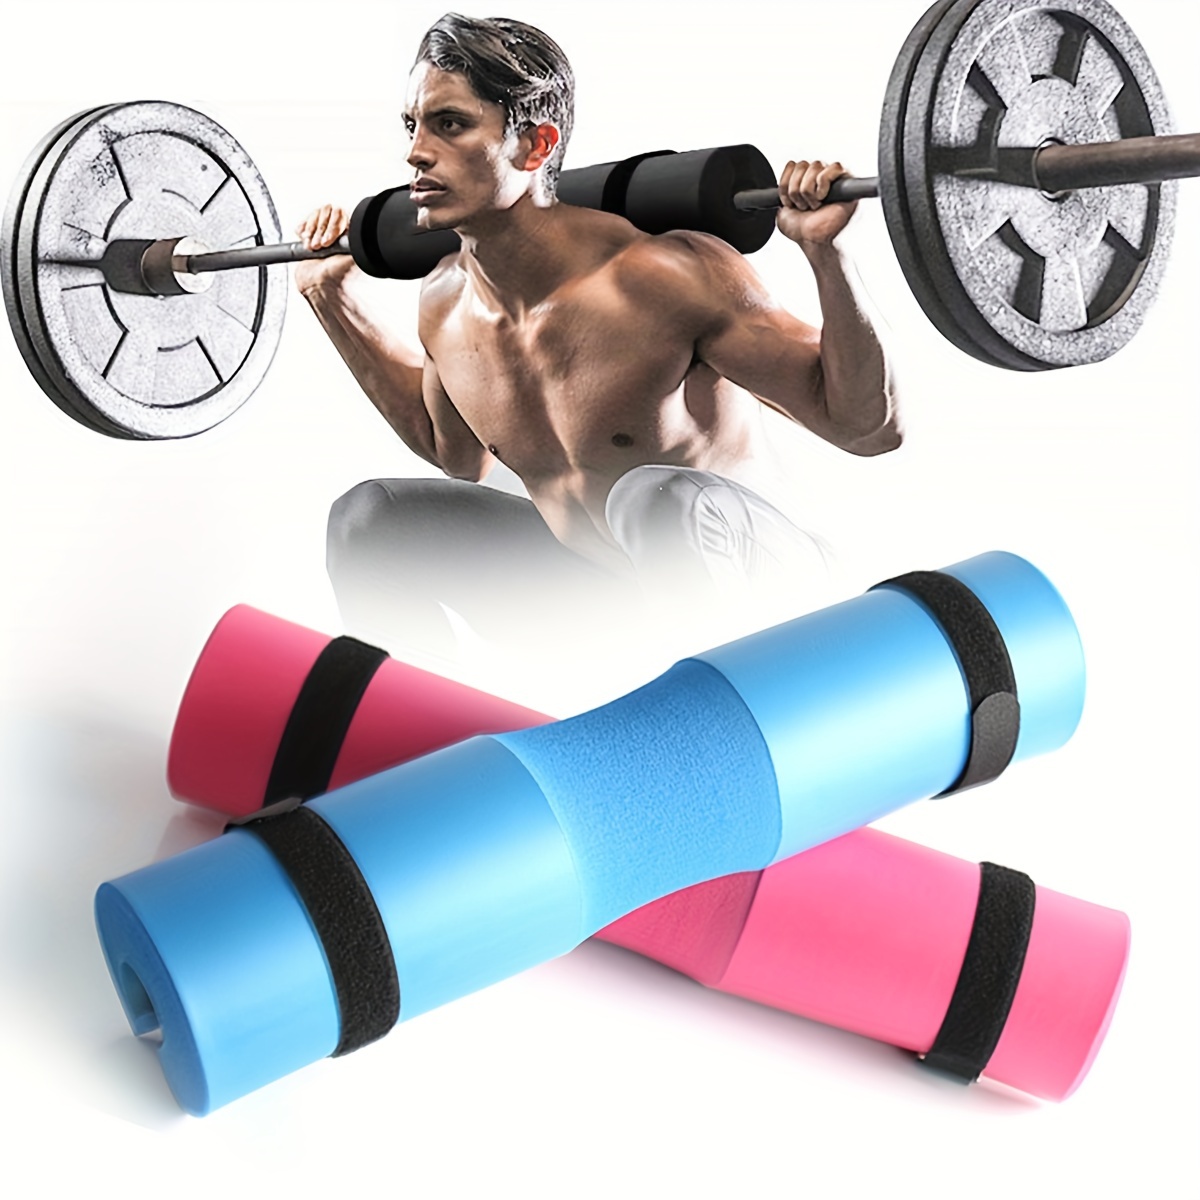 Olympic Barbell Pad